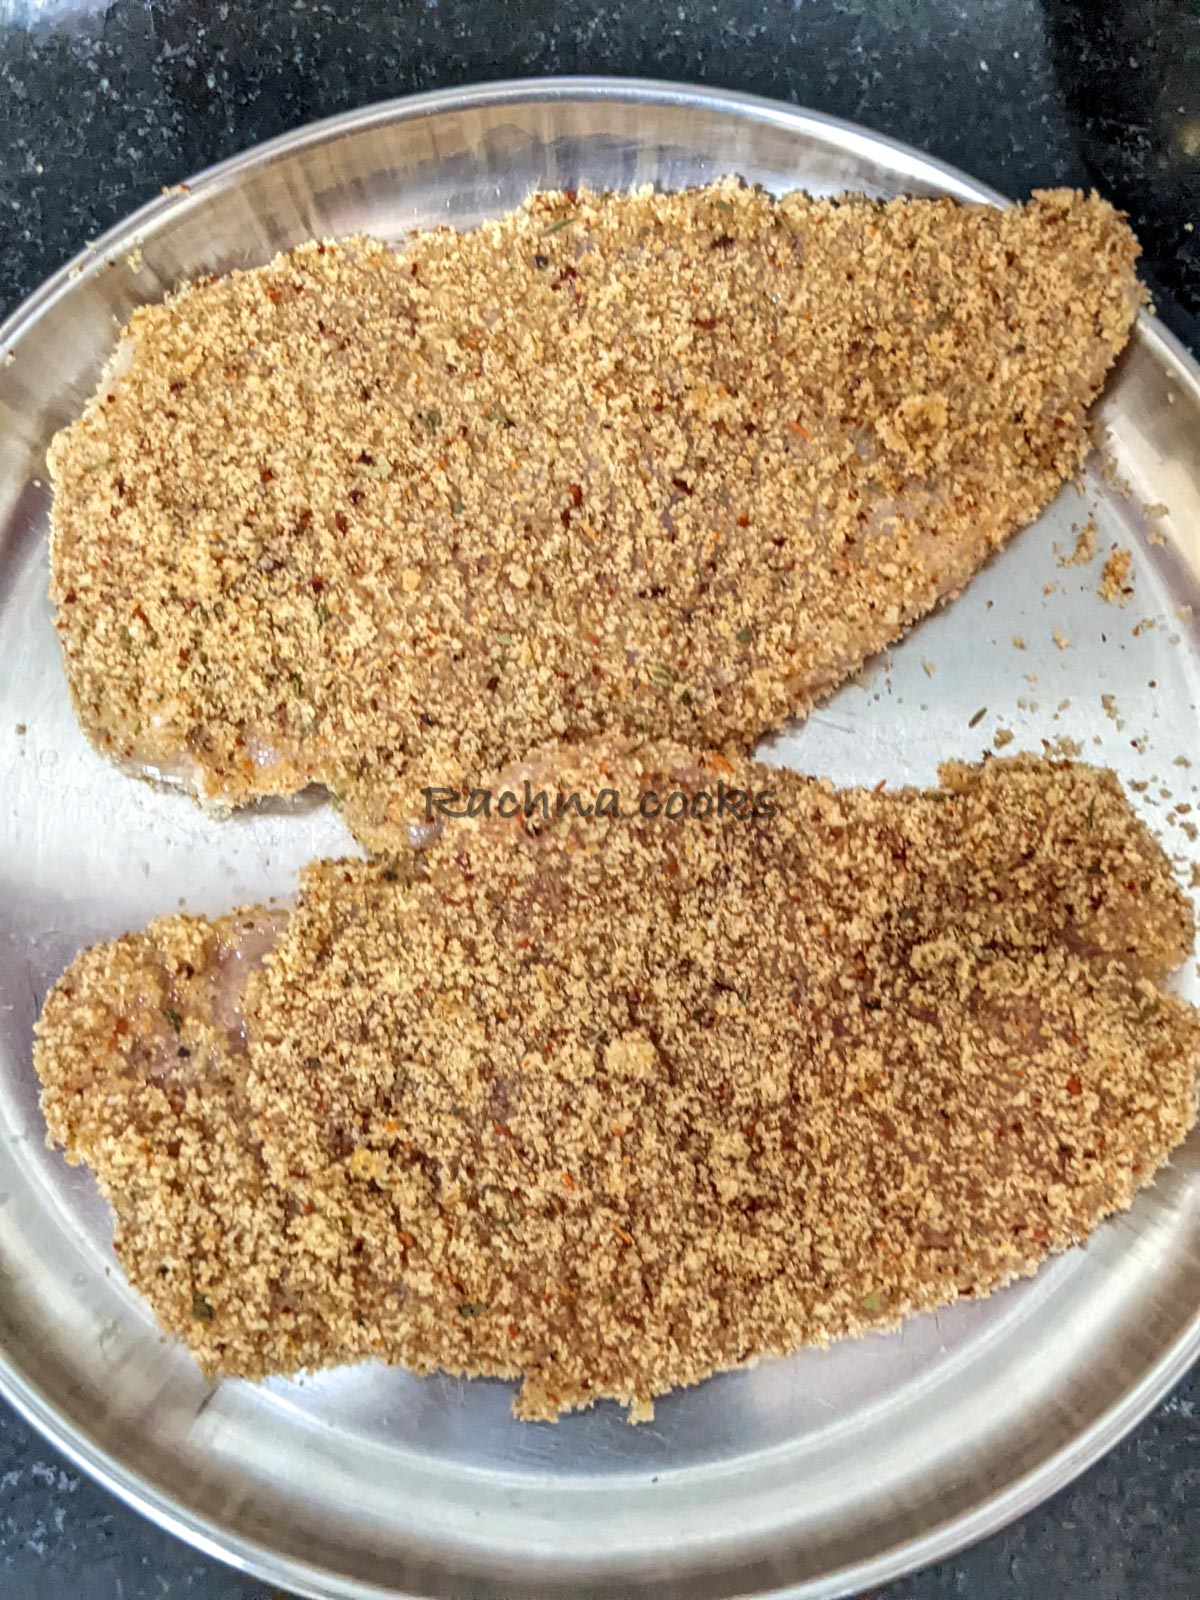 Two chicken breast slices after breading in a plate ready for air frying.